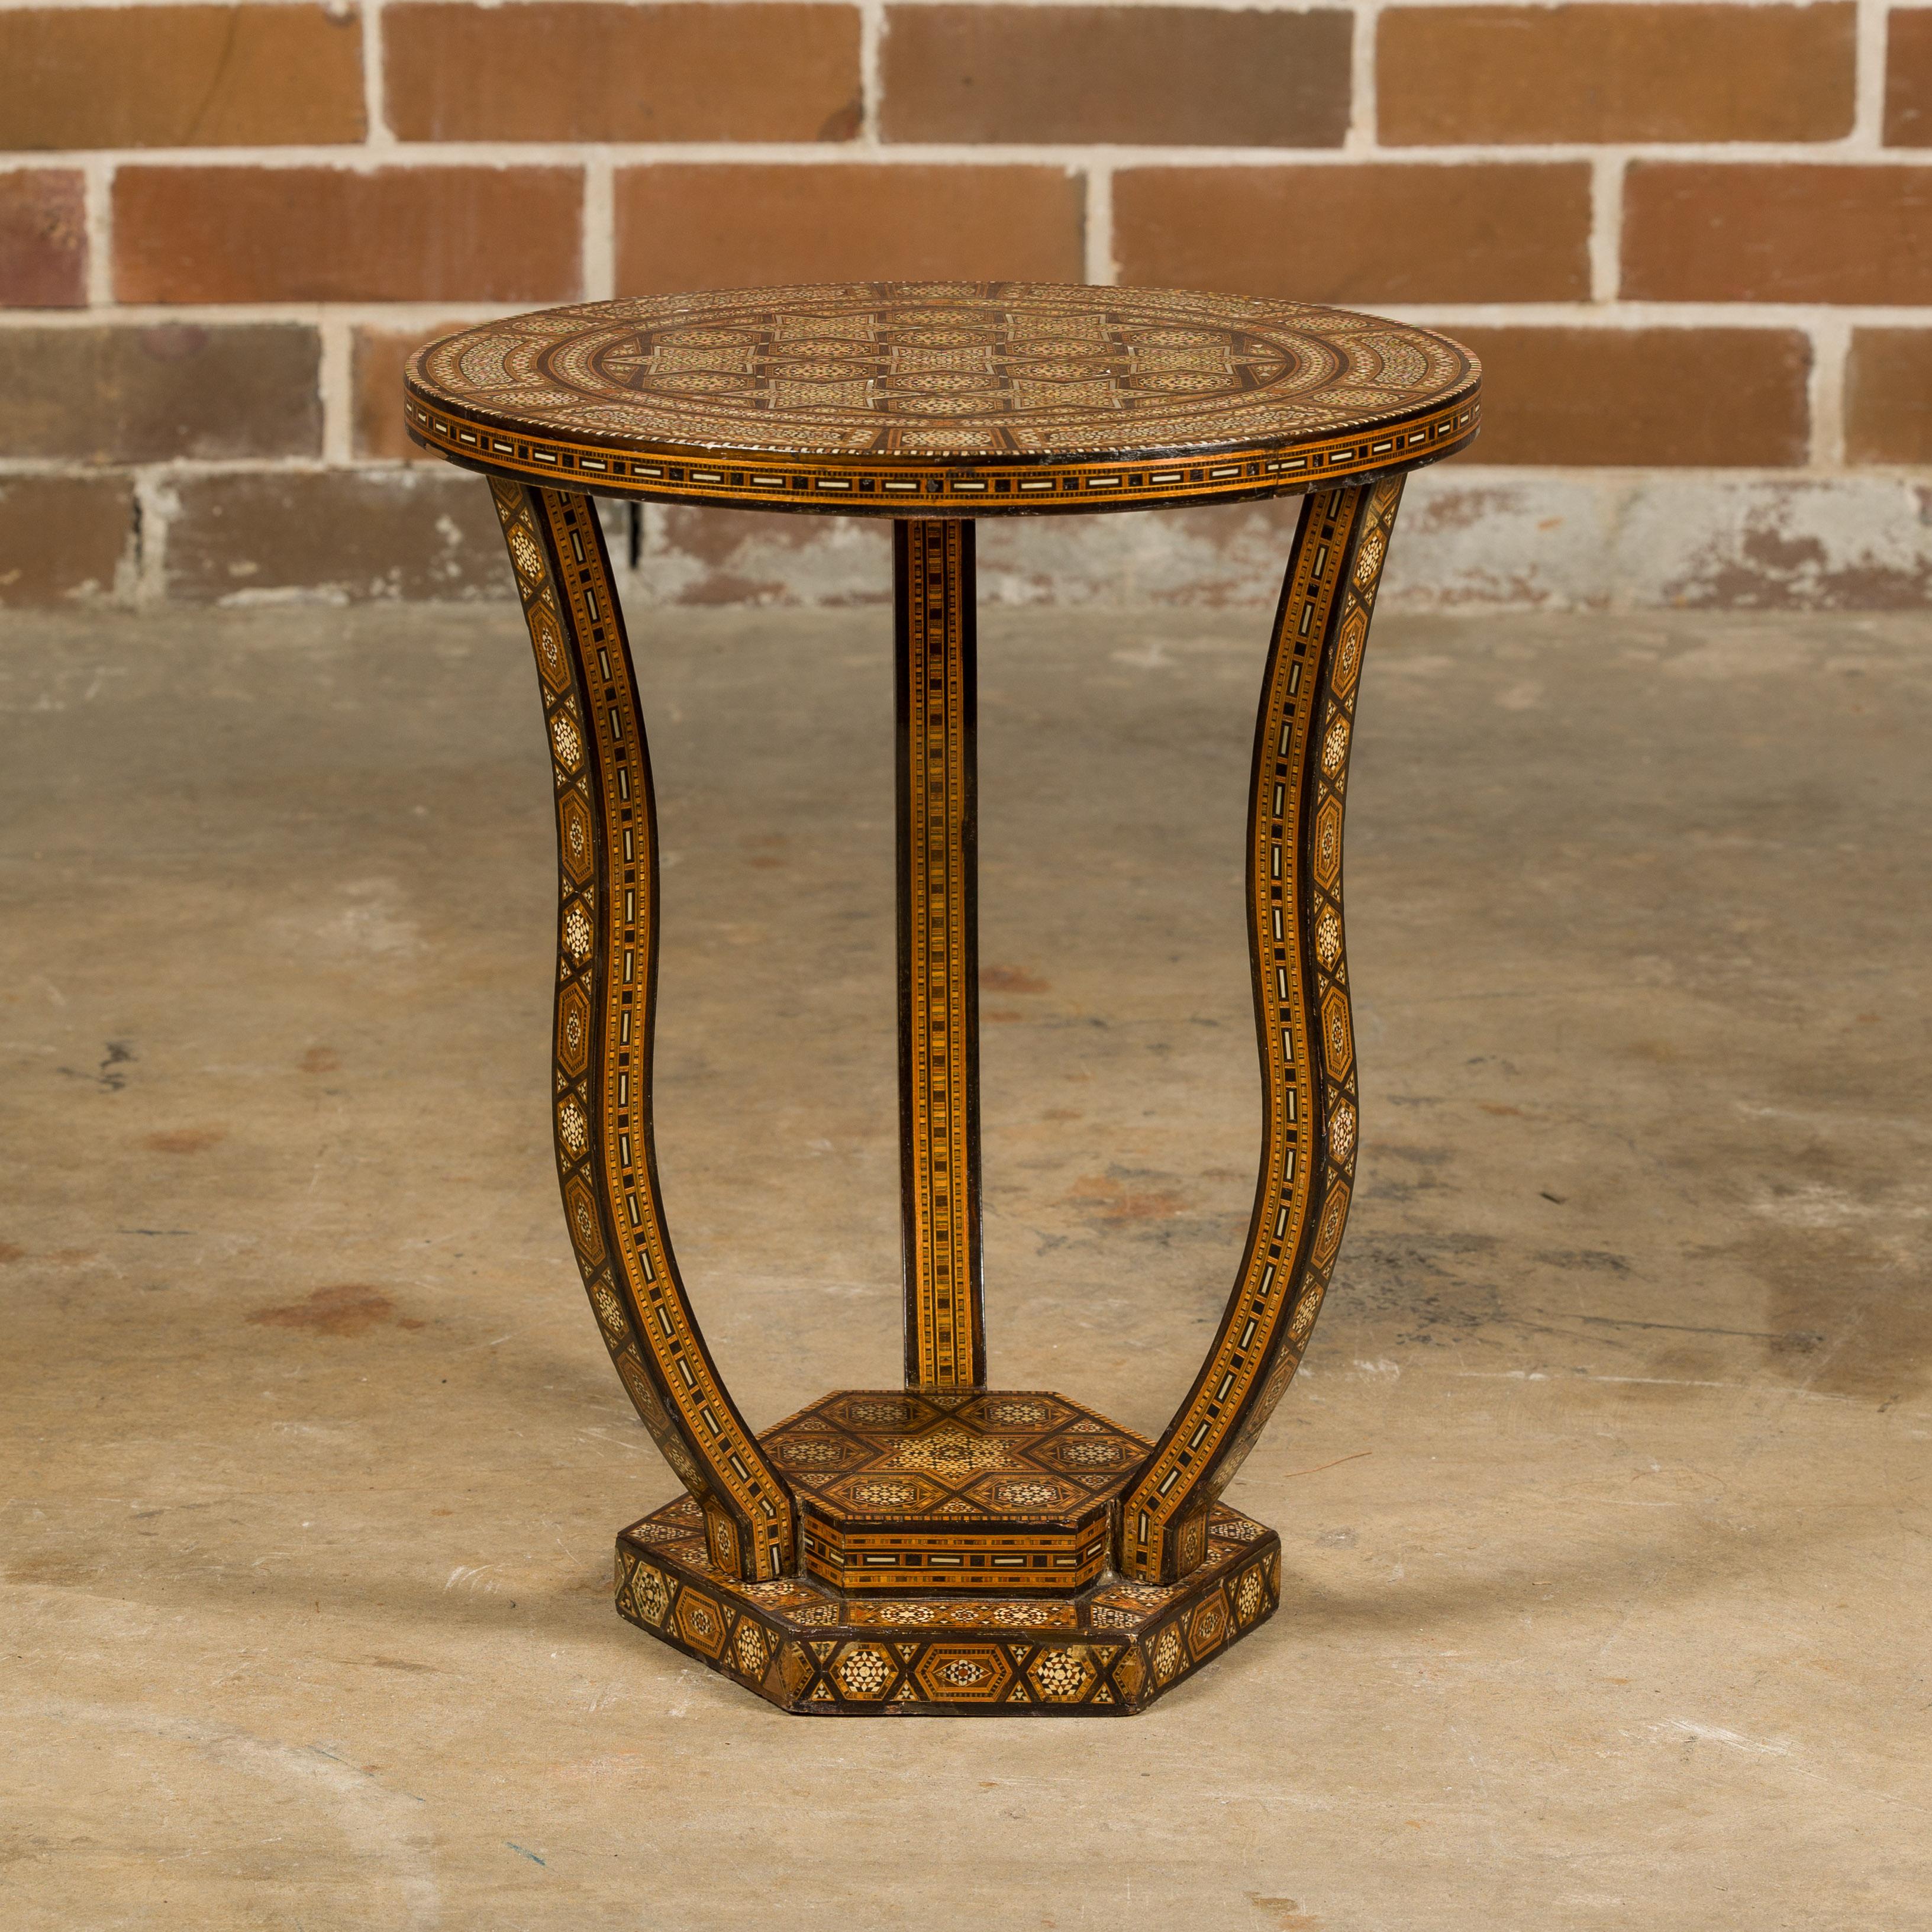 A Moorish style Moroccan drinks table from circa 1900 with circular top, abundant geometric bone inlay, three curving legs and stepped hexagonal base. This exquisite Moorish-style Moroccan drinks table from circa 1900 is a testament to the intricate